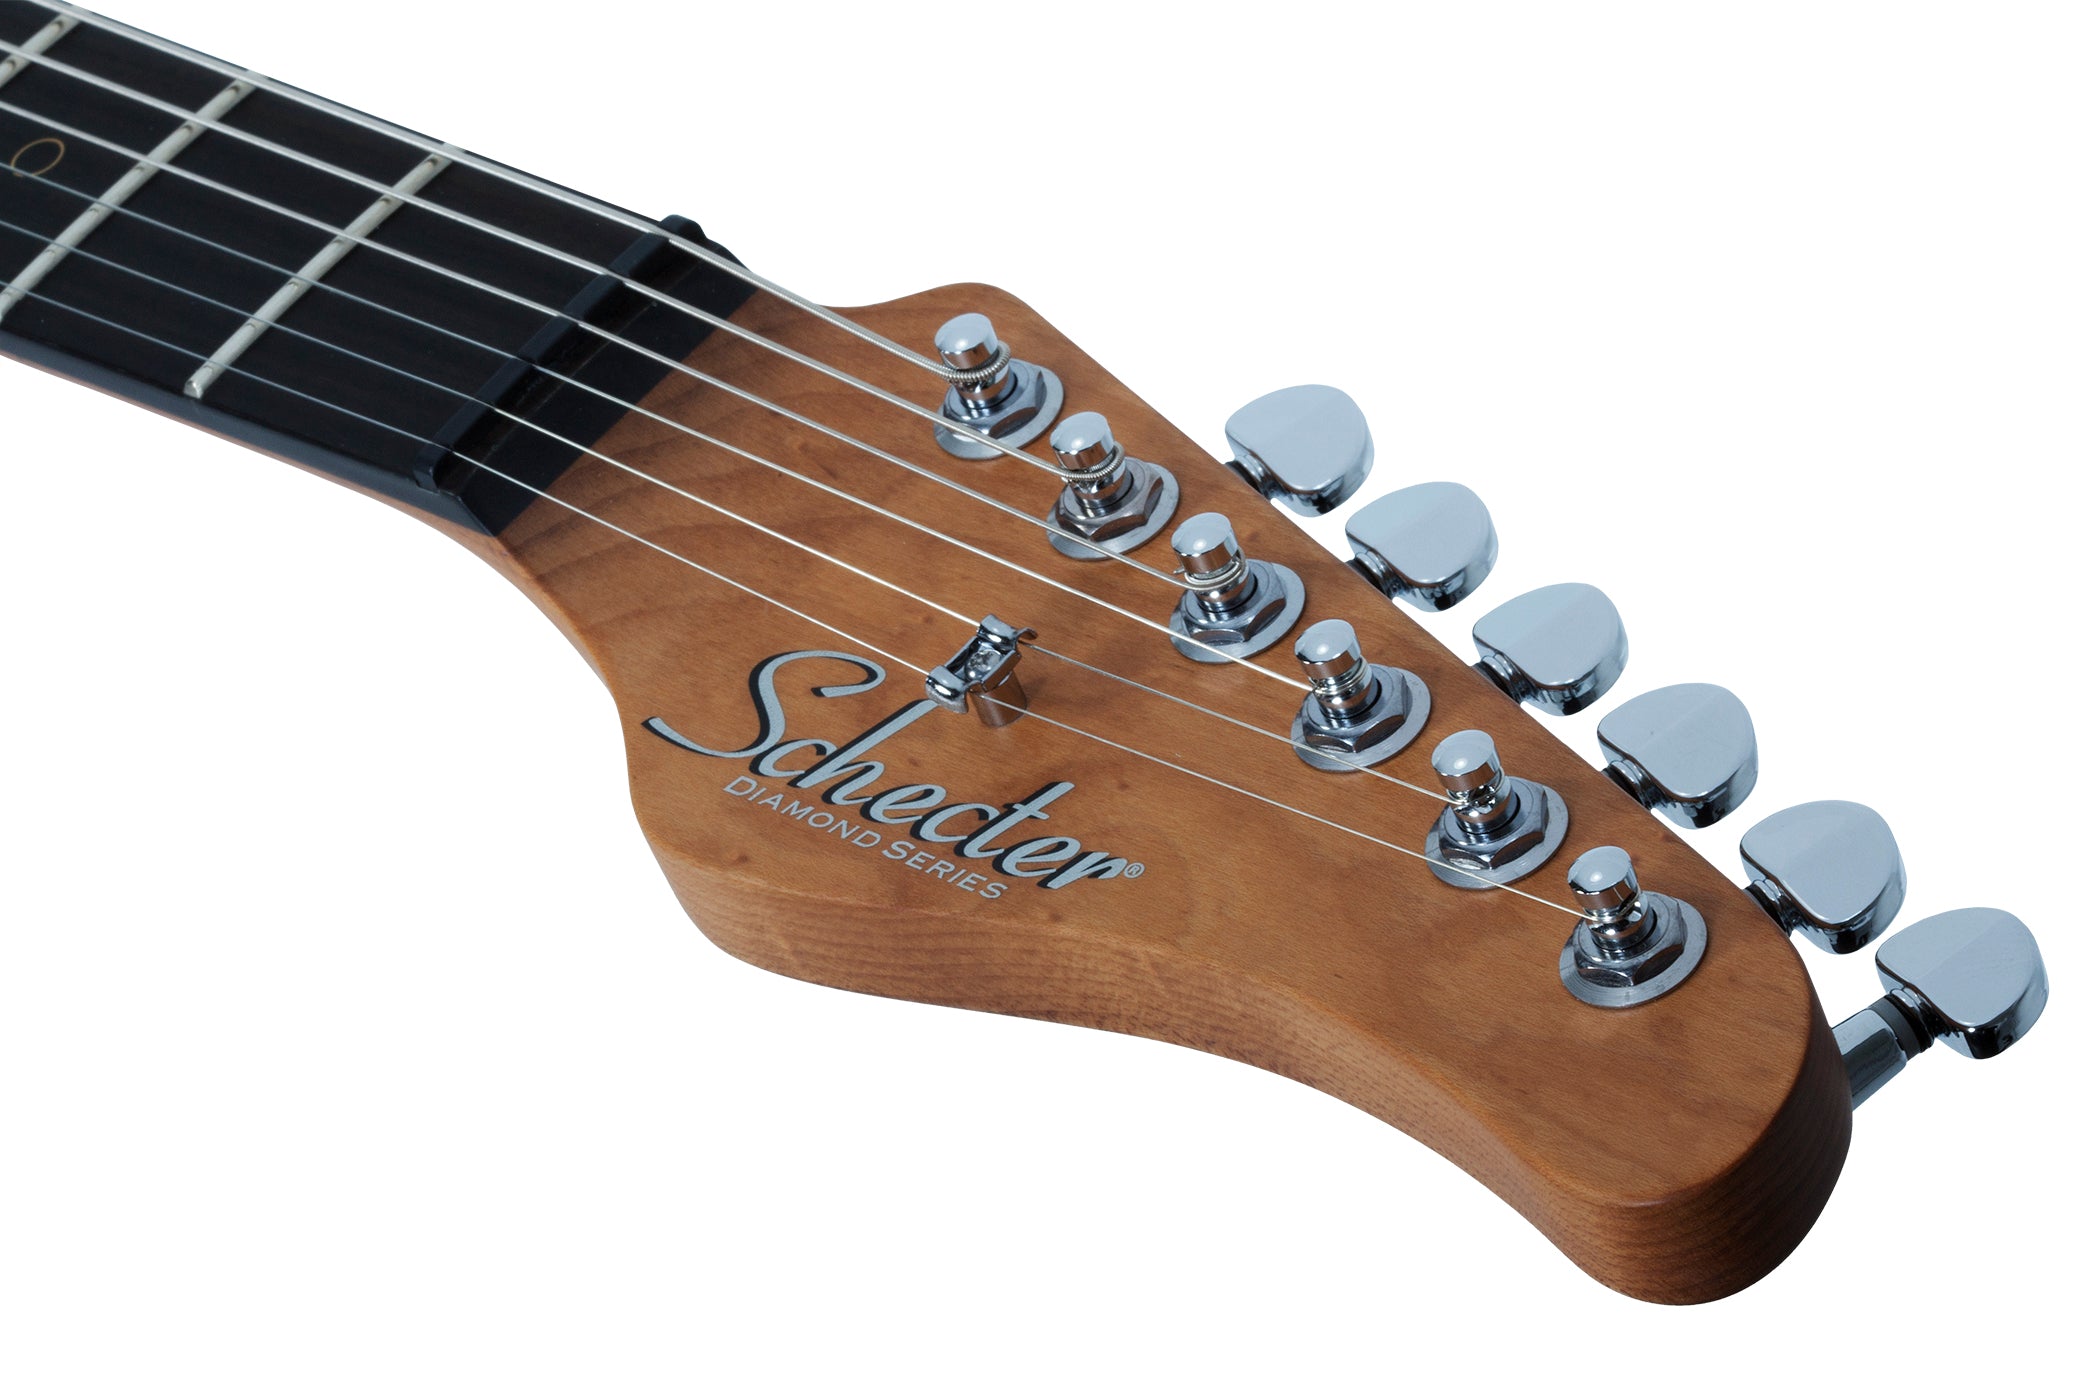 SCHECTER NICK JOHNSTON TRAD ASNW ELECTRIC GUITAR (368) MADE IN INDONESIA, SCHECTER, ELECTRIC GUITAR, schecter-electric-guitar-nickjtra-asnw, ZOSO MUSIC SDN BHD